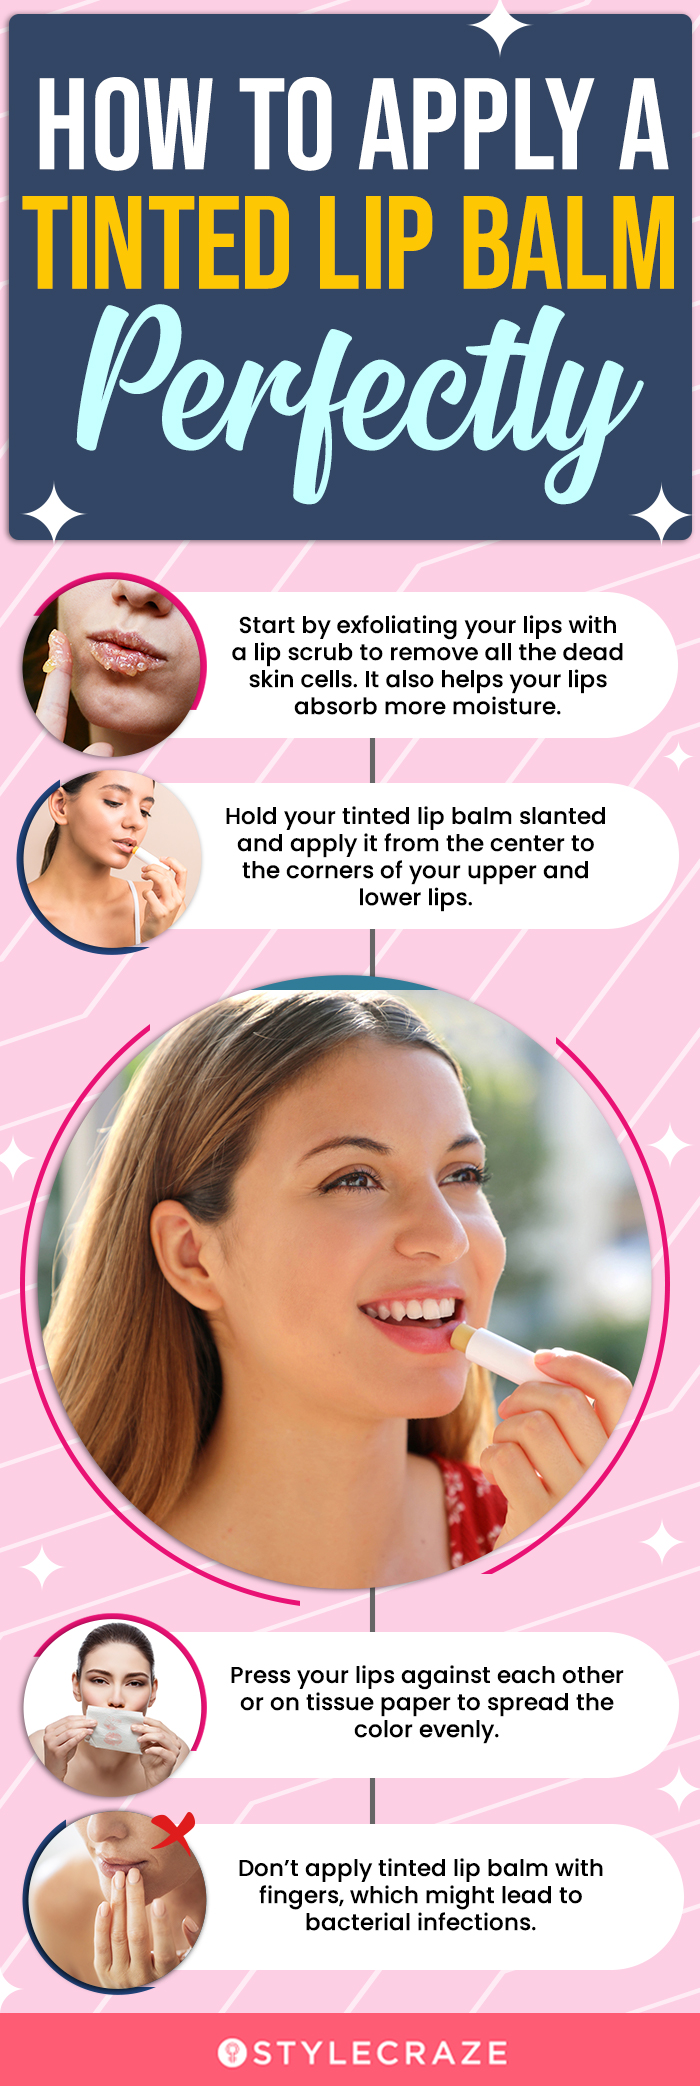 How To Apply A Tinted Lip Balm Perfectly (infographic)